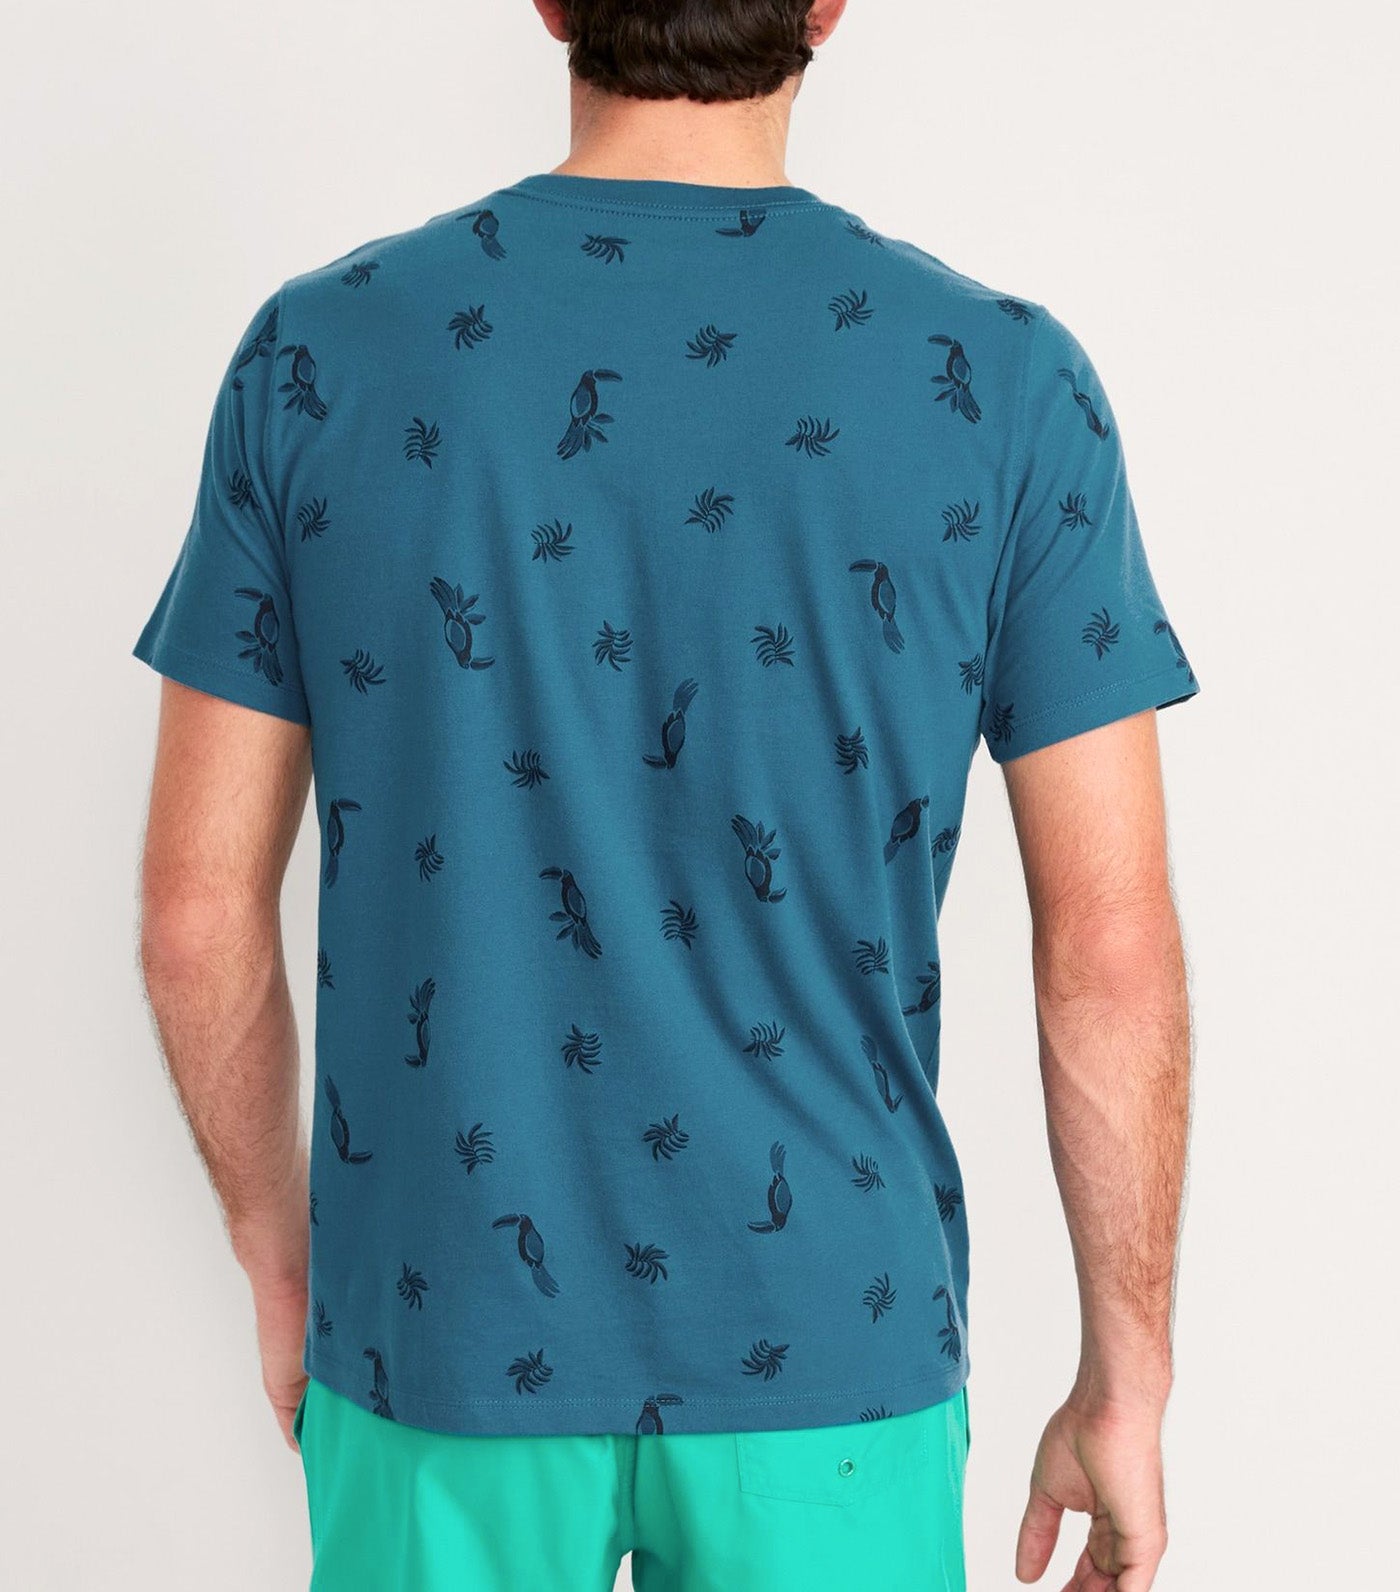 Soft-Washed Printed Crew-Neck T-Shirt for Men Toucan Pattern